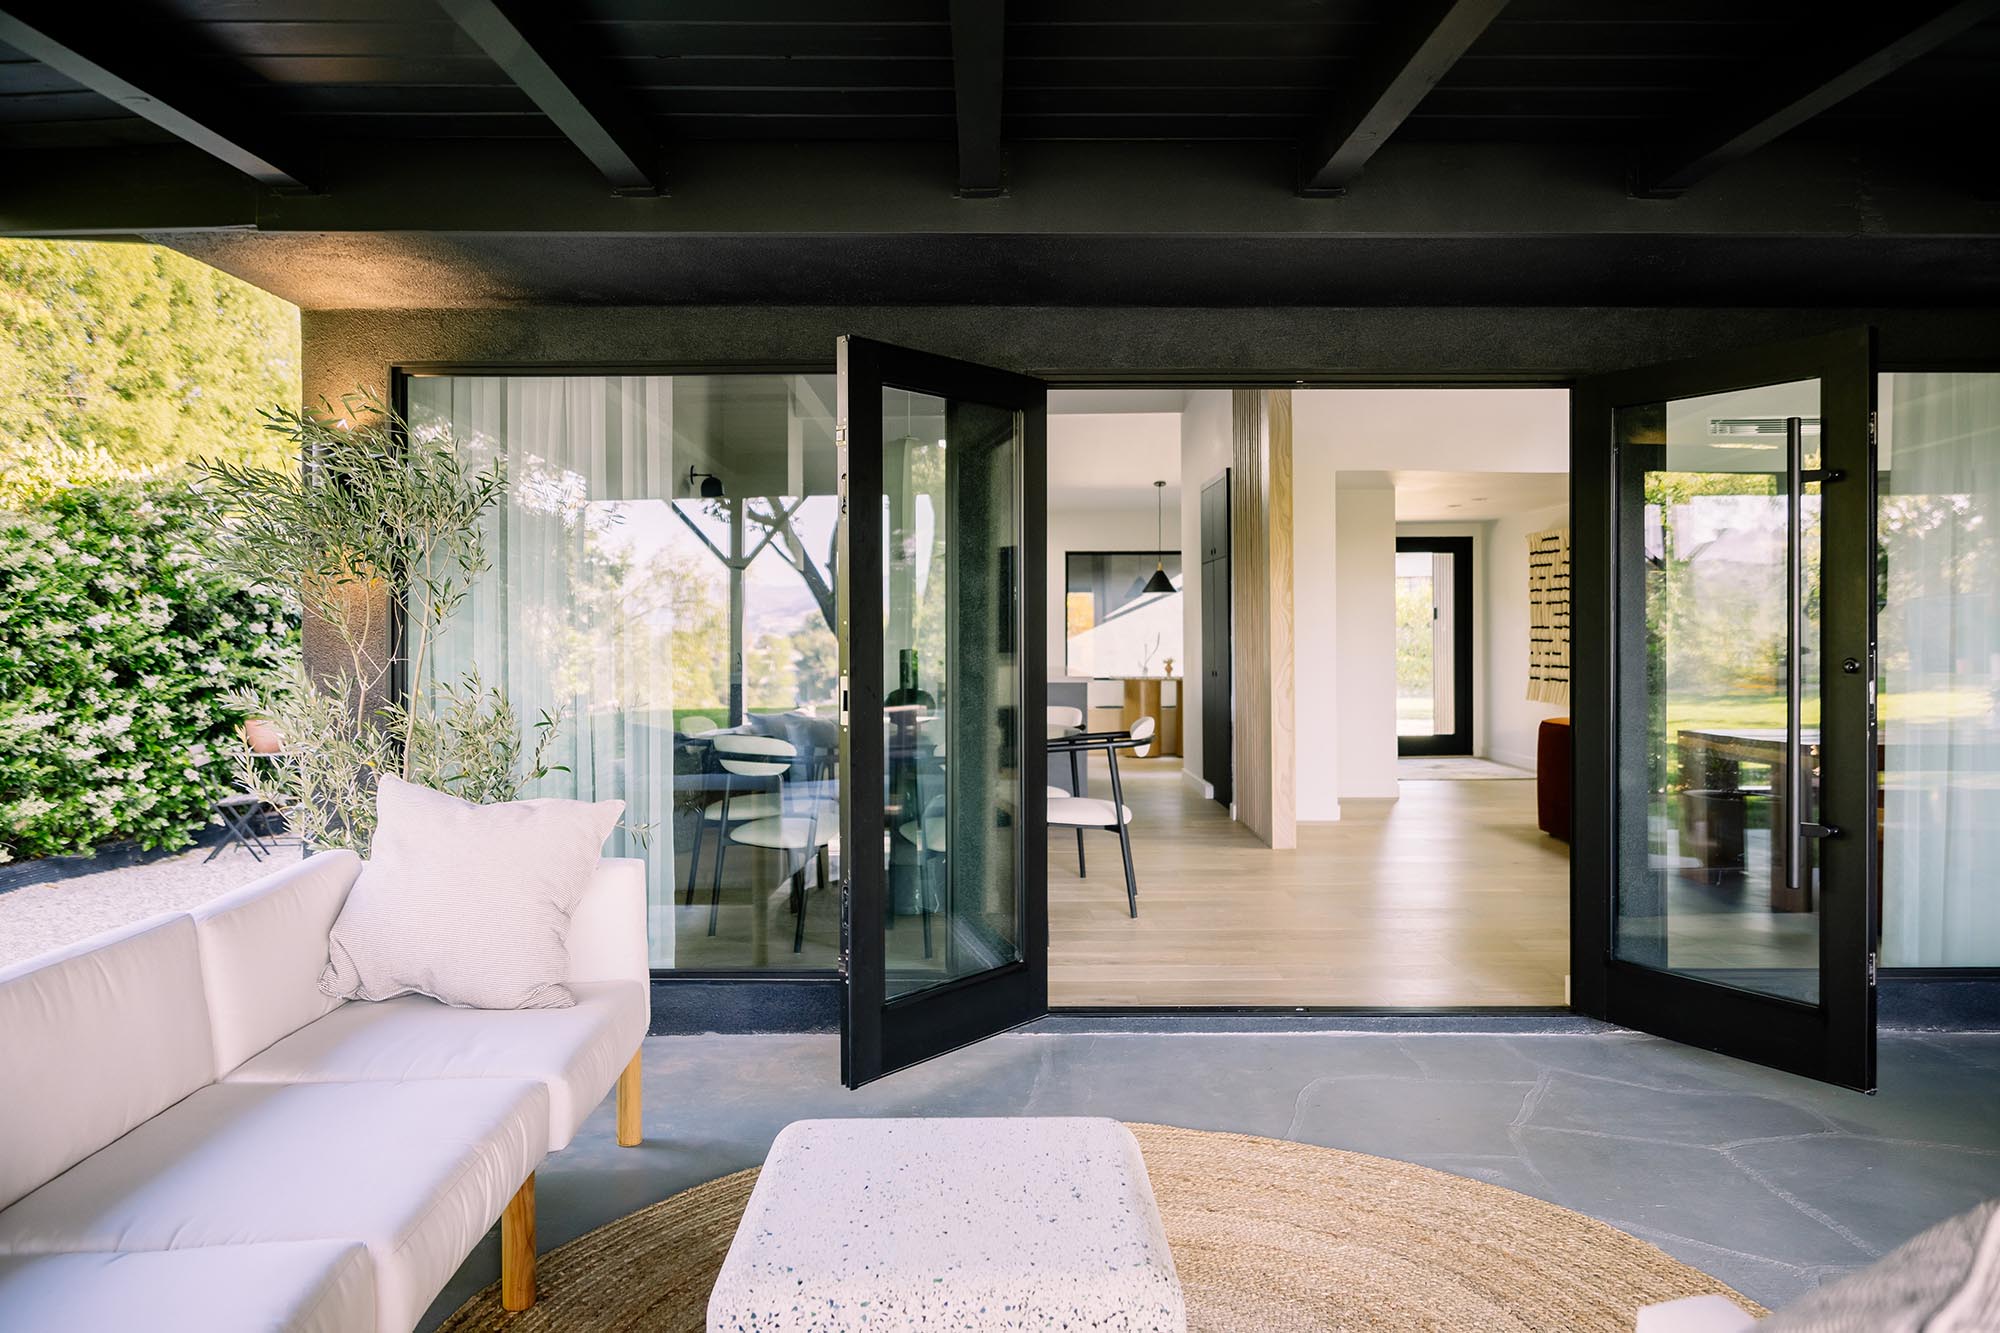 Two large, hinged doors connect the patio to the home.